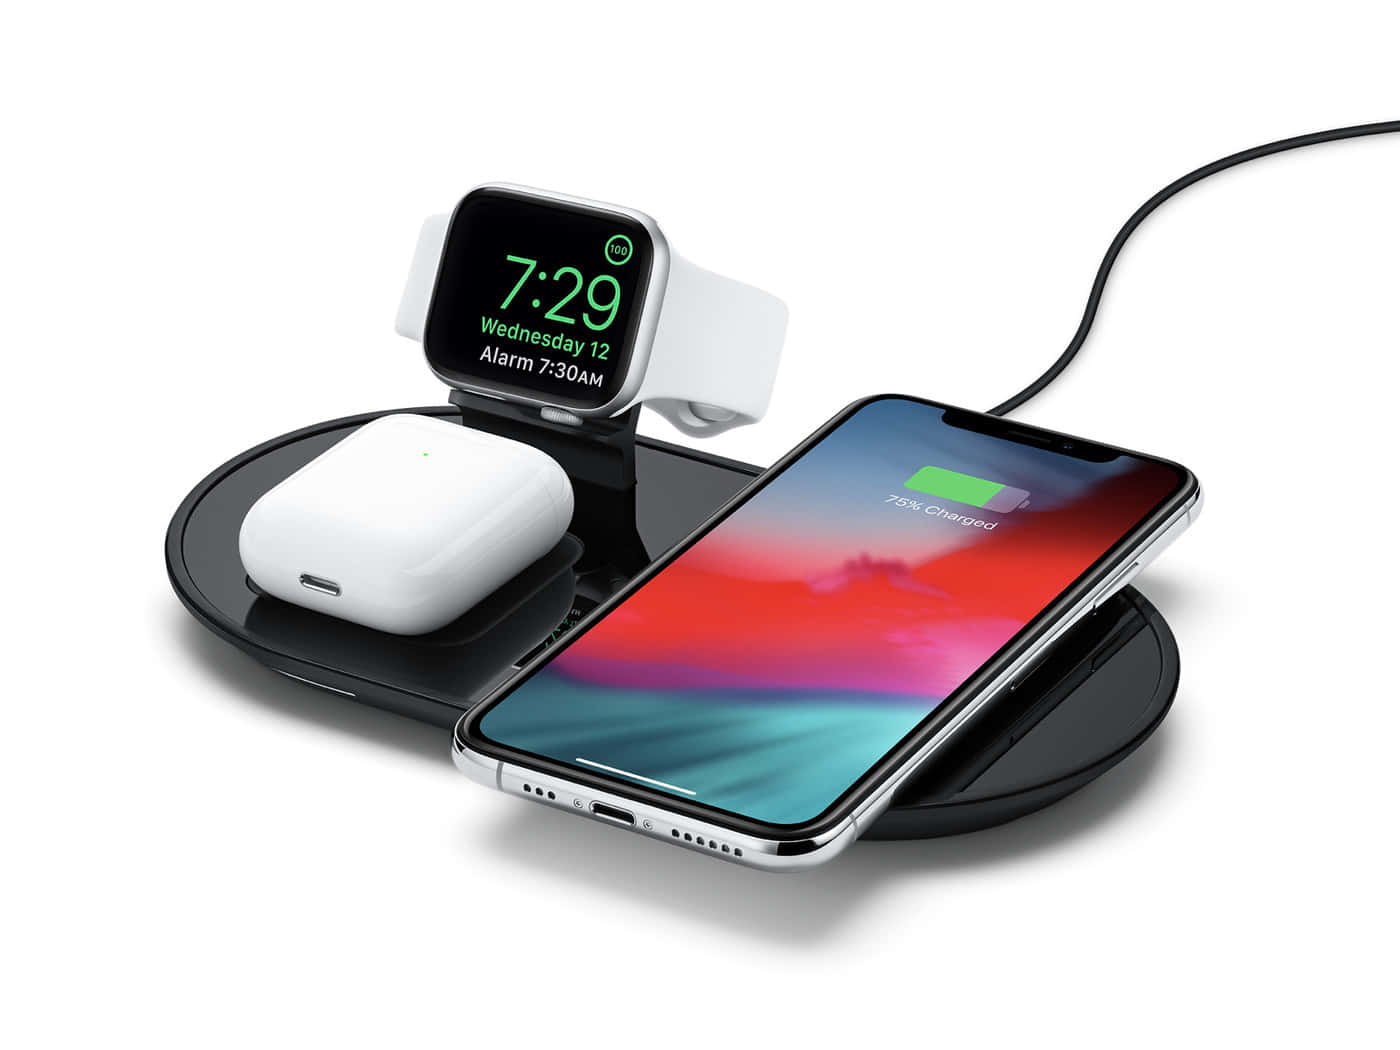 “Never be bound by cables again. Enjoy wireless charging!” Wallpaper